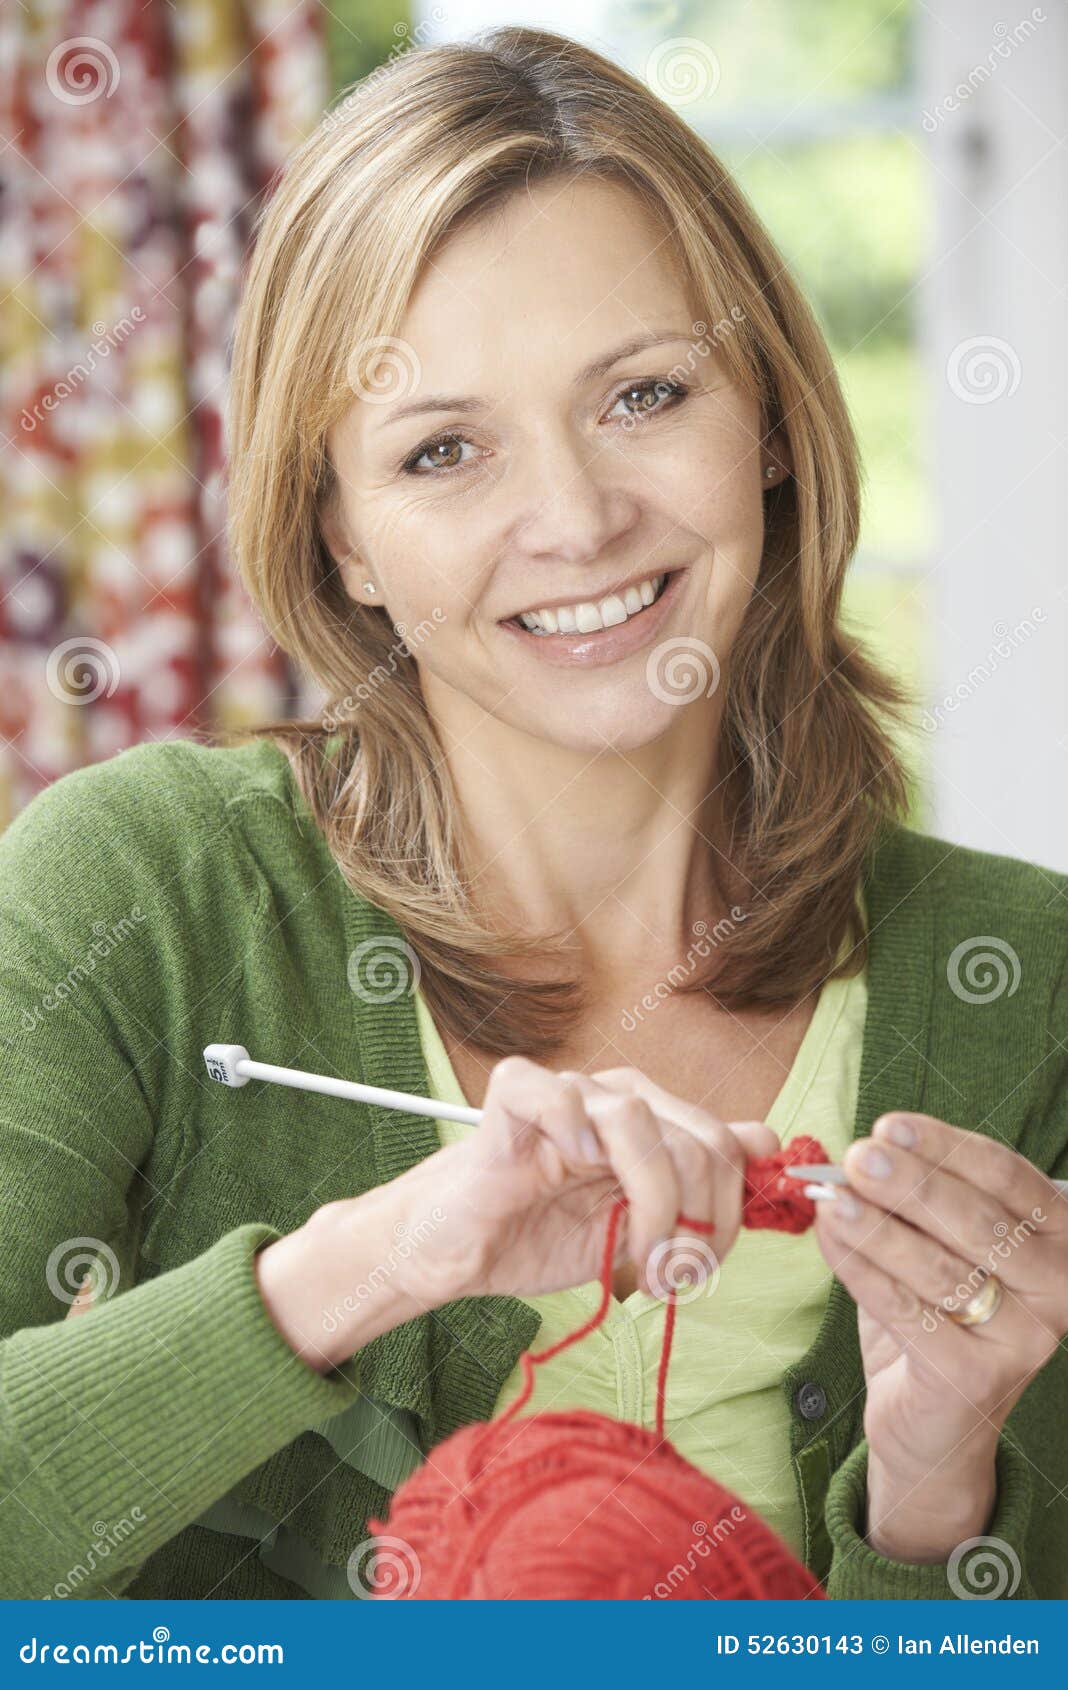 Crocheting and home hobby concept. Top view of crochet work with crochet  hook and pink yarn on white wooden table Stock Photo - Alamy